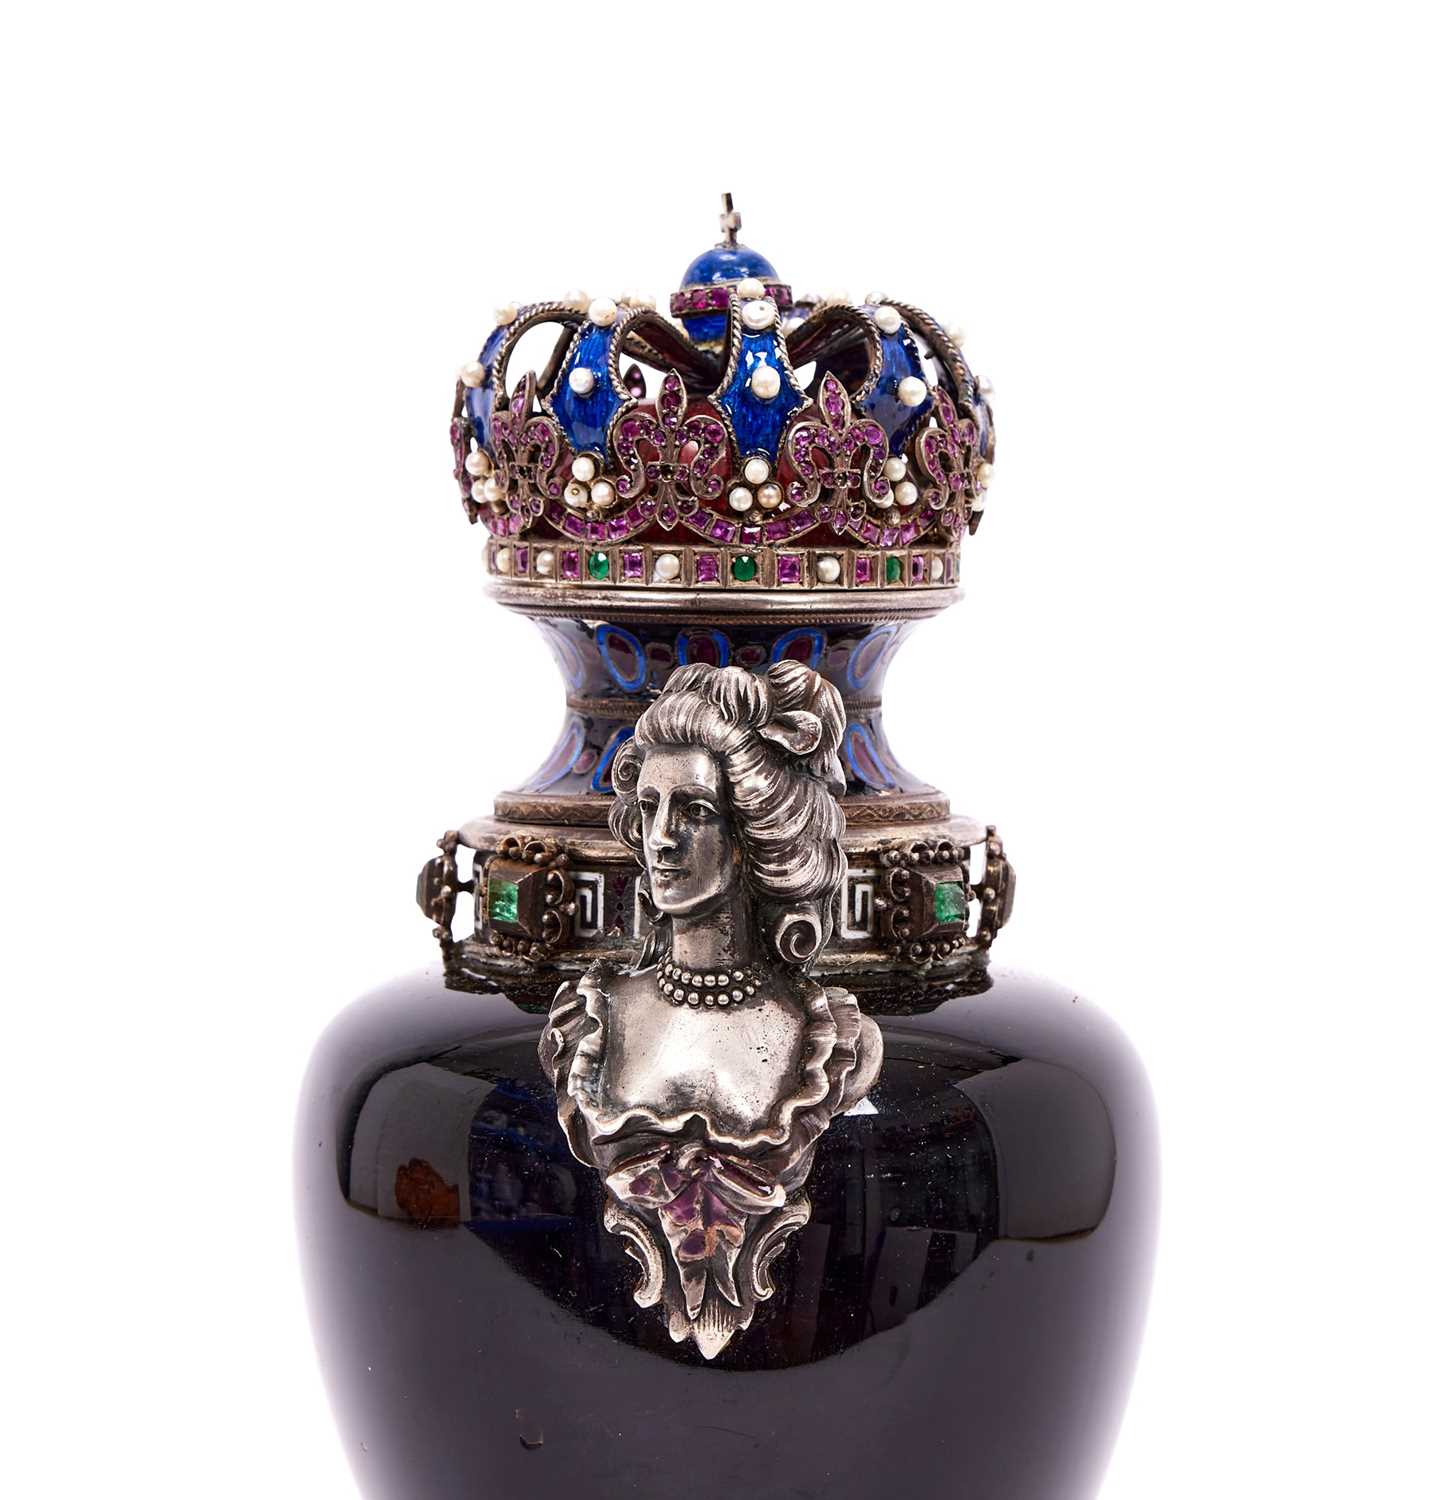 A FINE 19TH CENTURY VIENNESE ENAMEL, SILVER AND JEWELLED URN AND COVER OF ROYAL THEME - Image 5 of 6